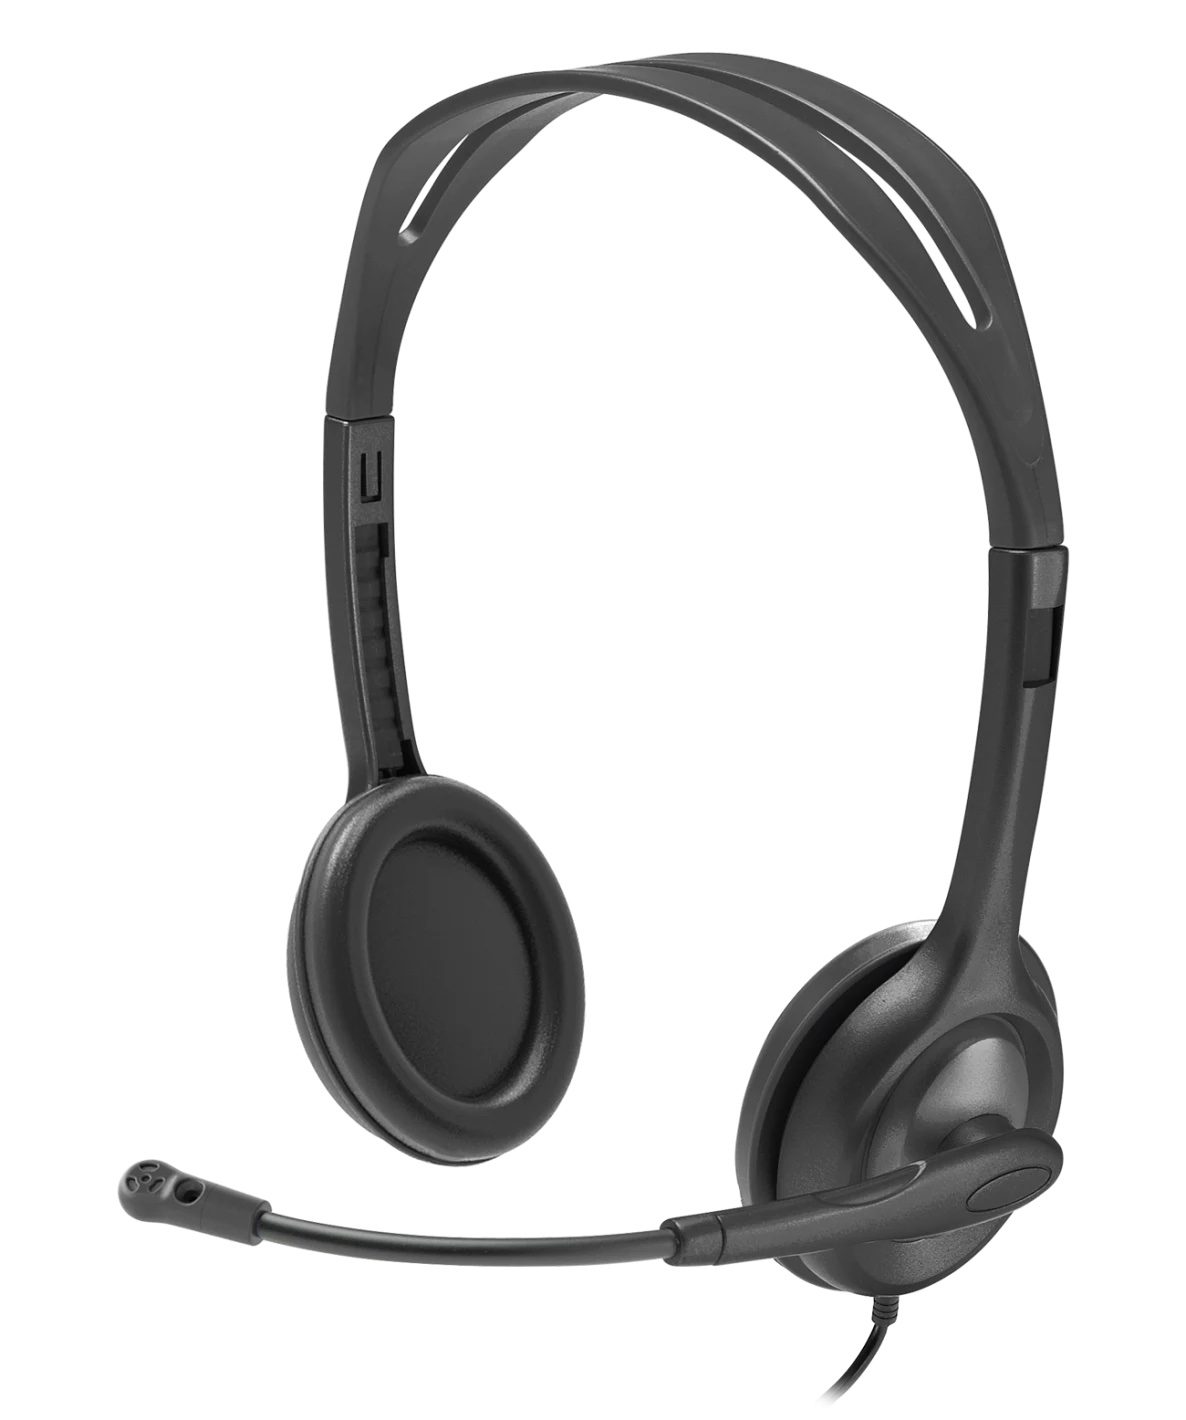 Logitech H111 headset for students